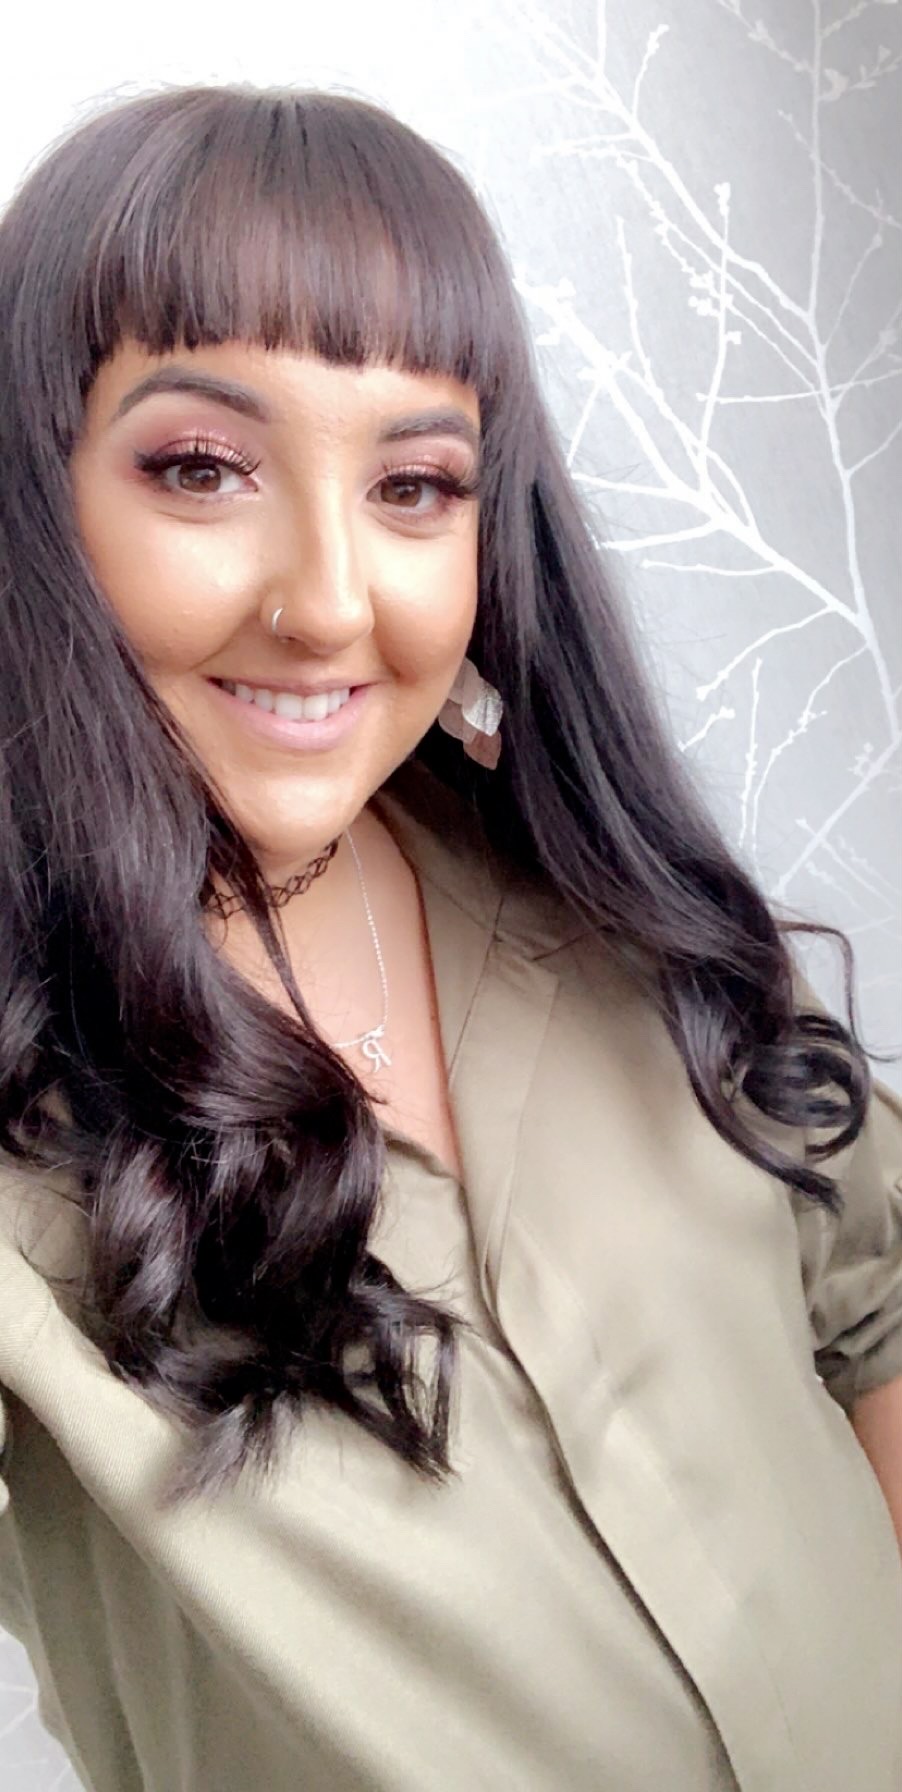 An head and shoulders image of Roz looking into the camera and smiling. Roz is a woman with long wavy brown hair with a fringe. She is leaning against a grey wall, wearing a light brown jacket.